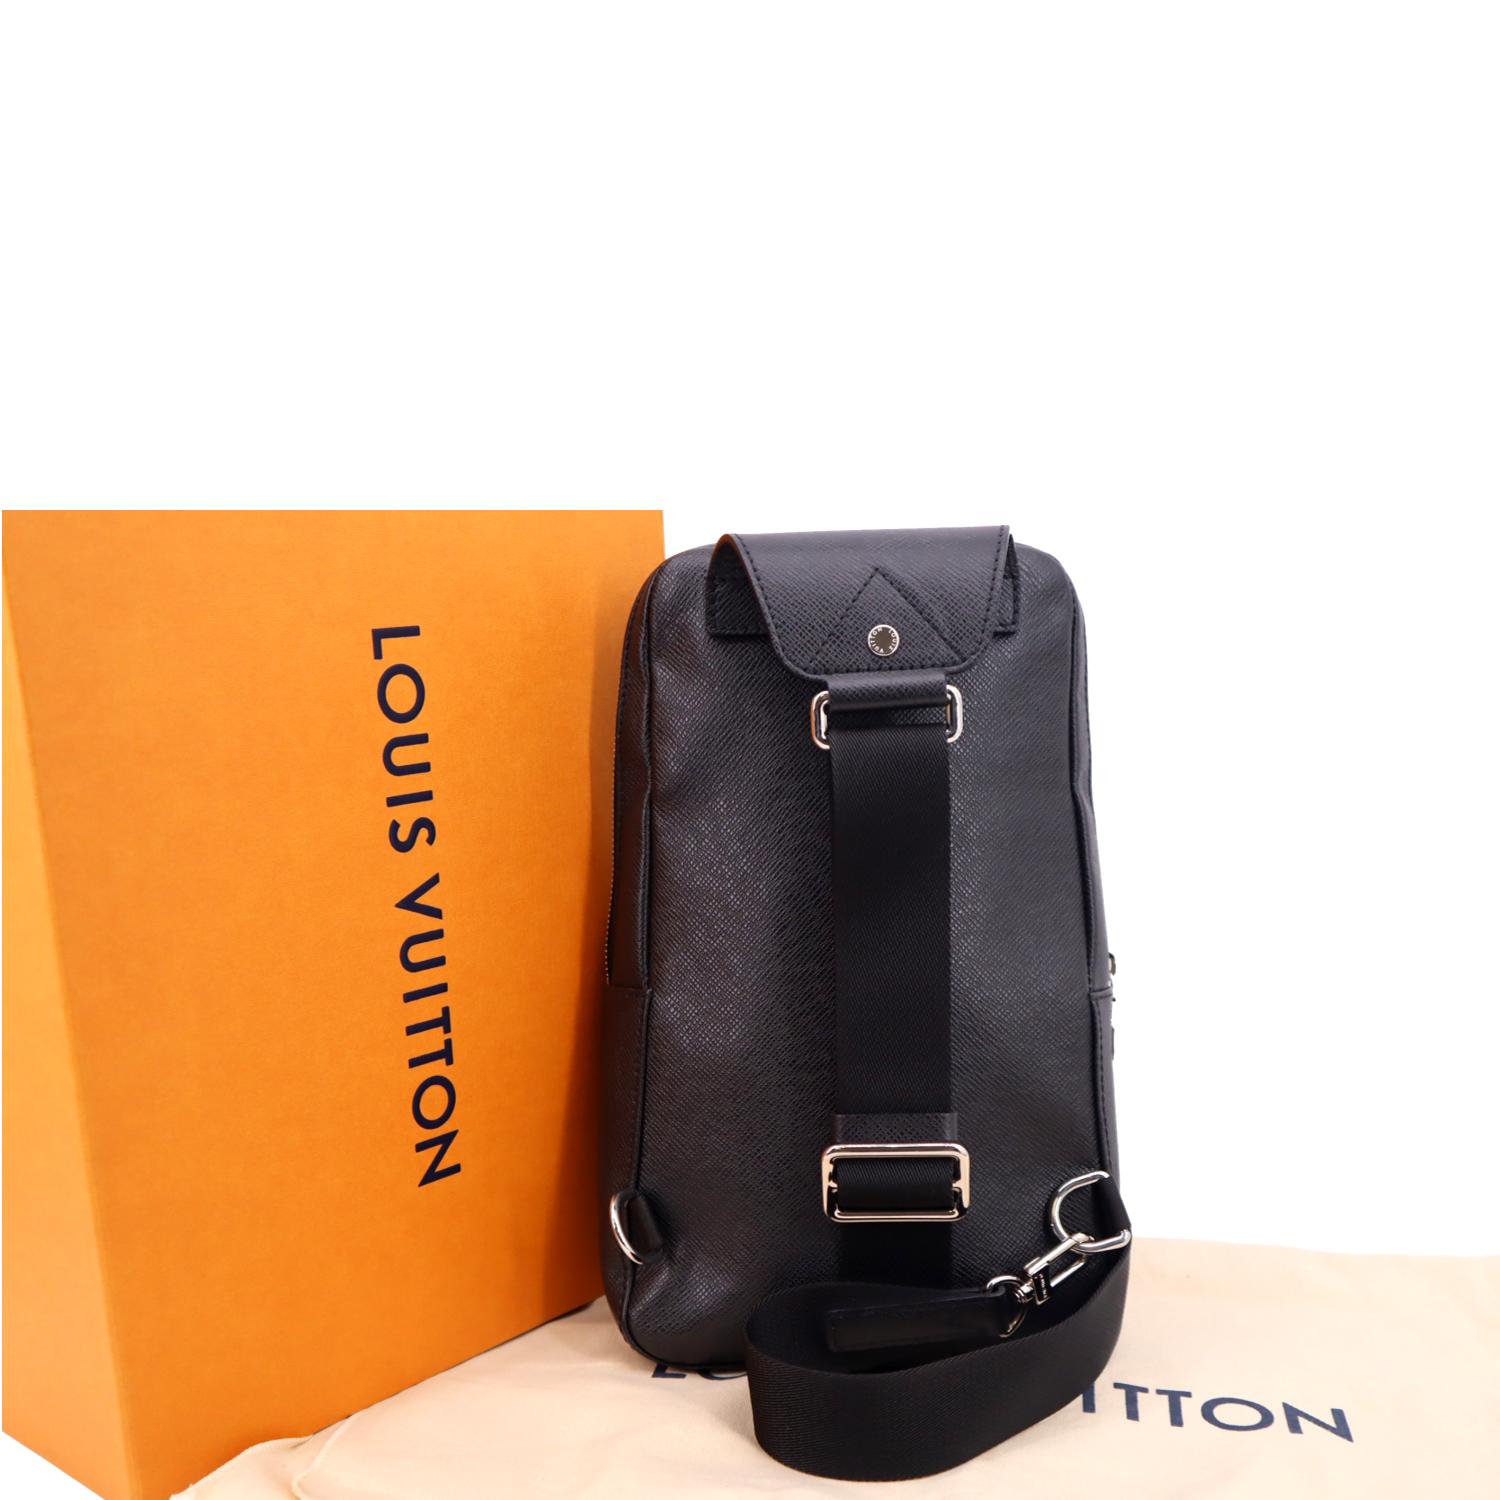 Louis Vuitton Avenue Sling Taiga Leather Backpack Bag